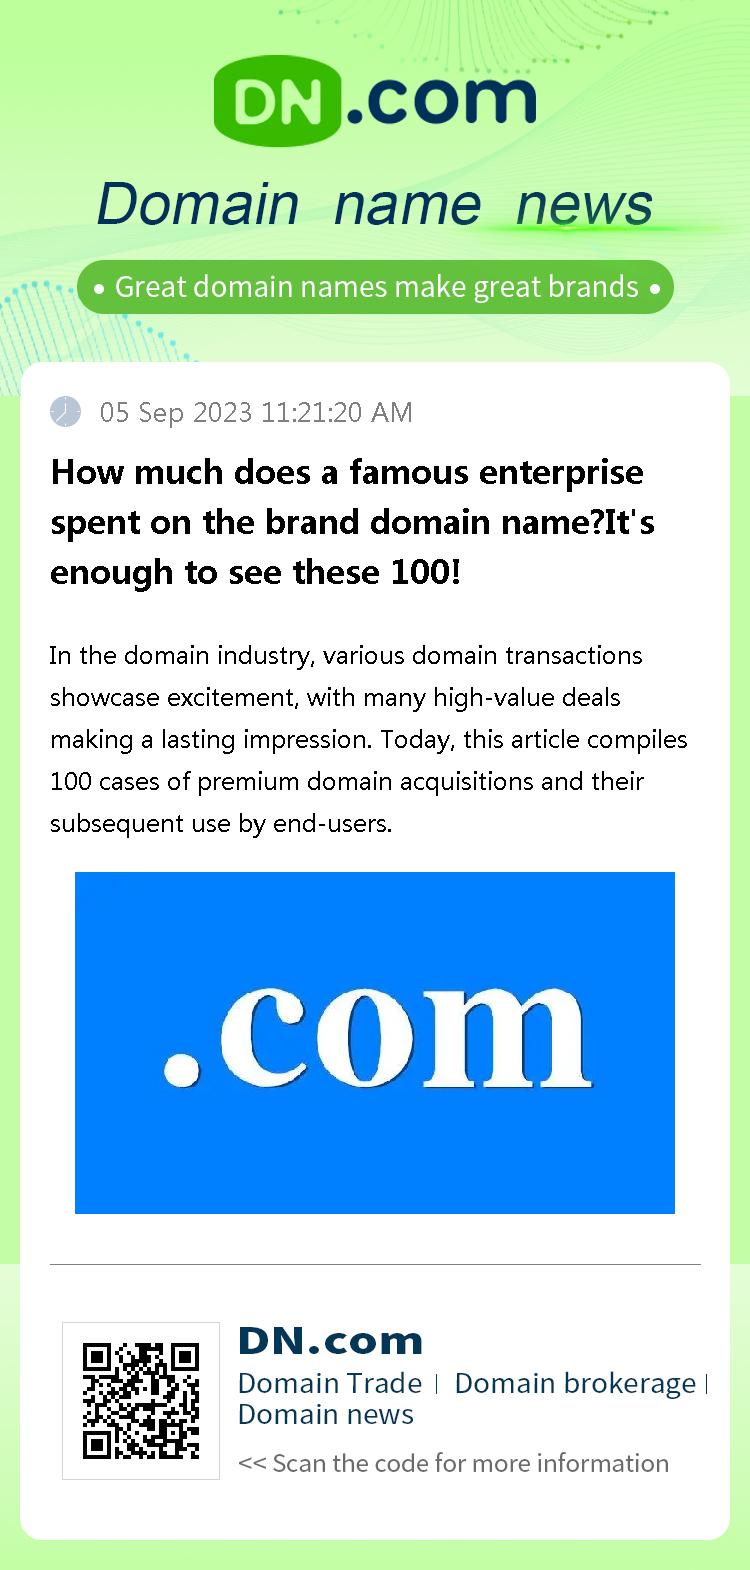 How much does a famous enterprise spent on the brand domain name?It's enough to see these 100!